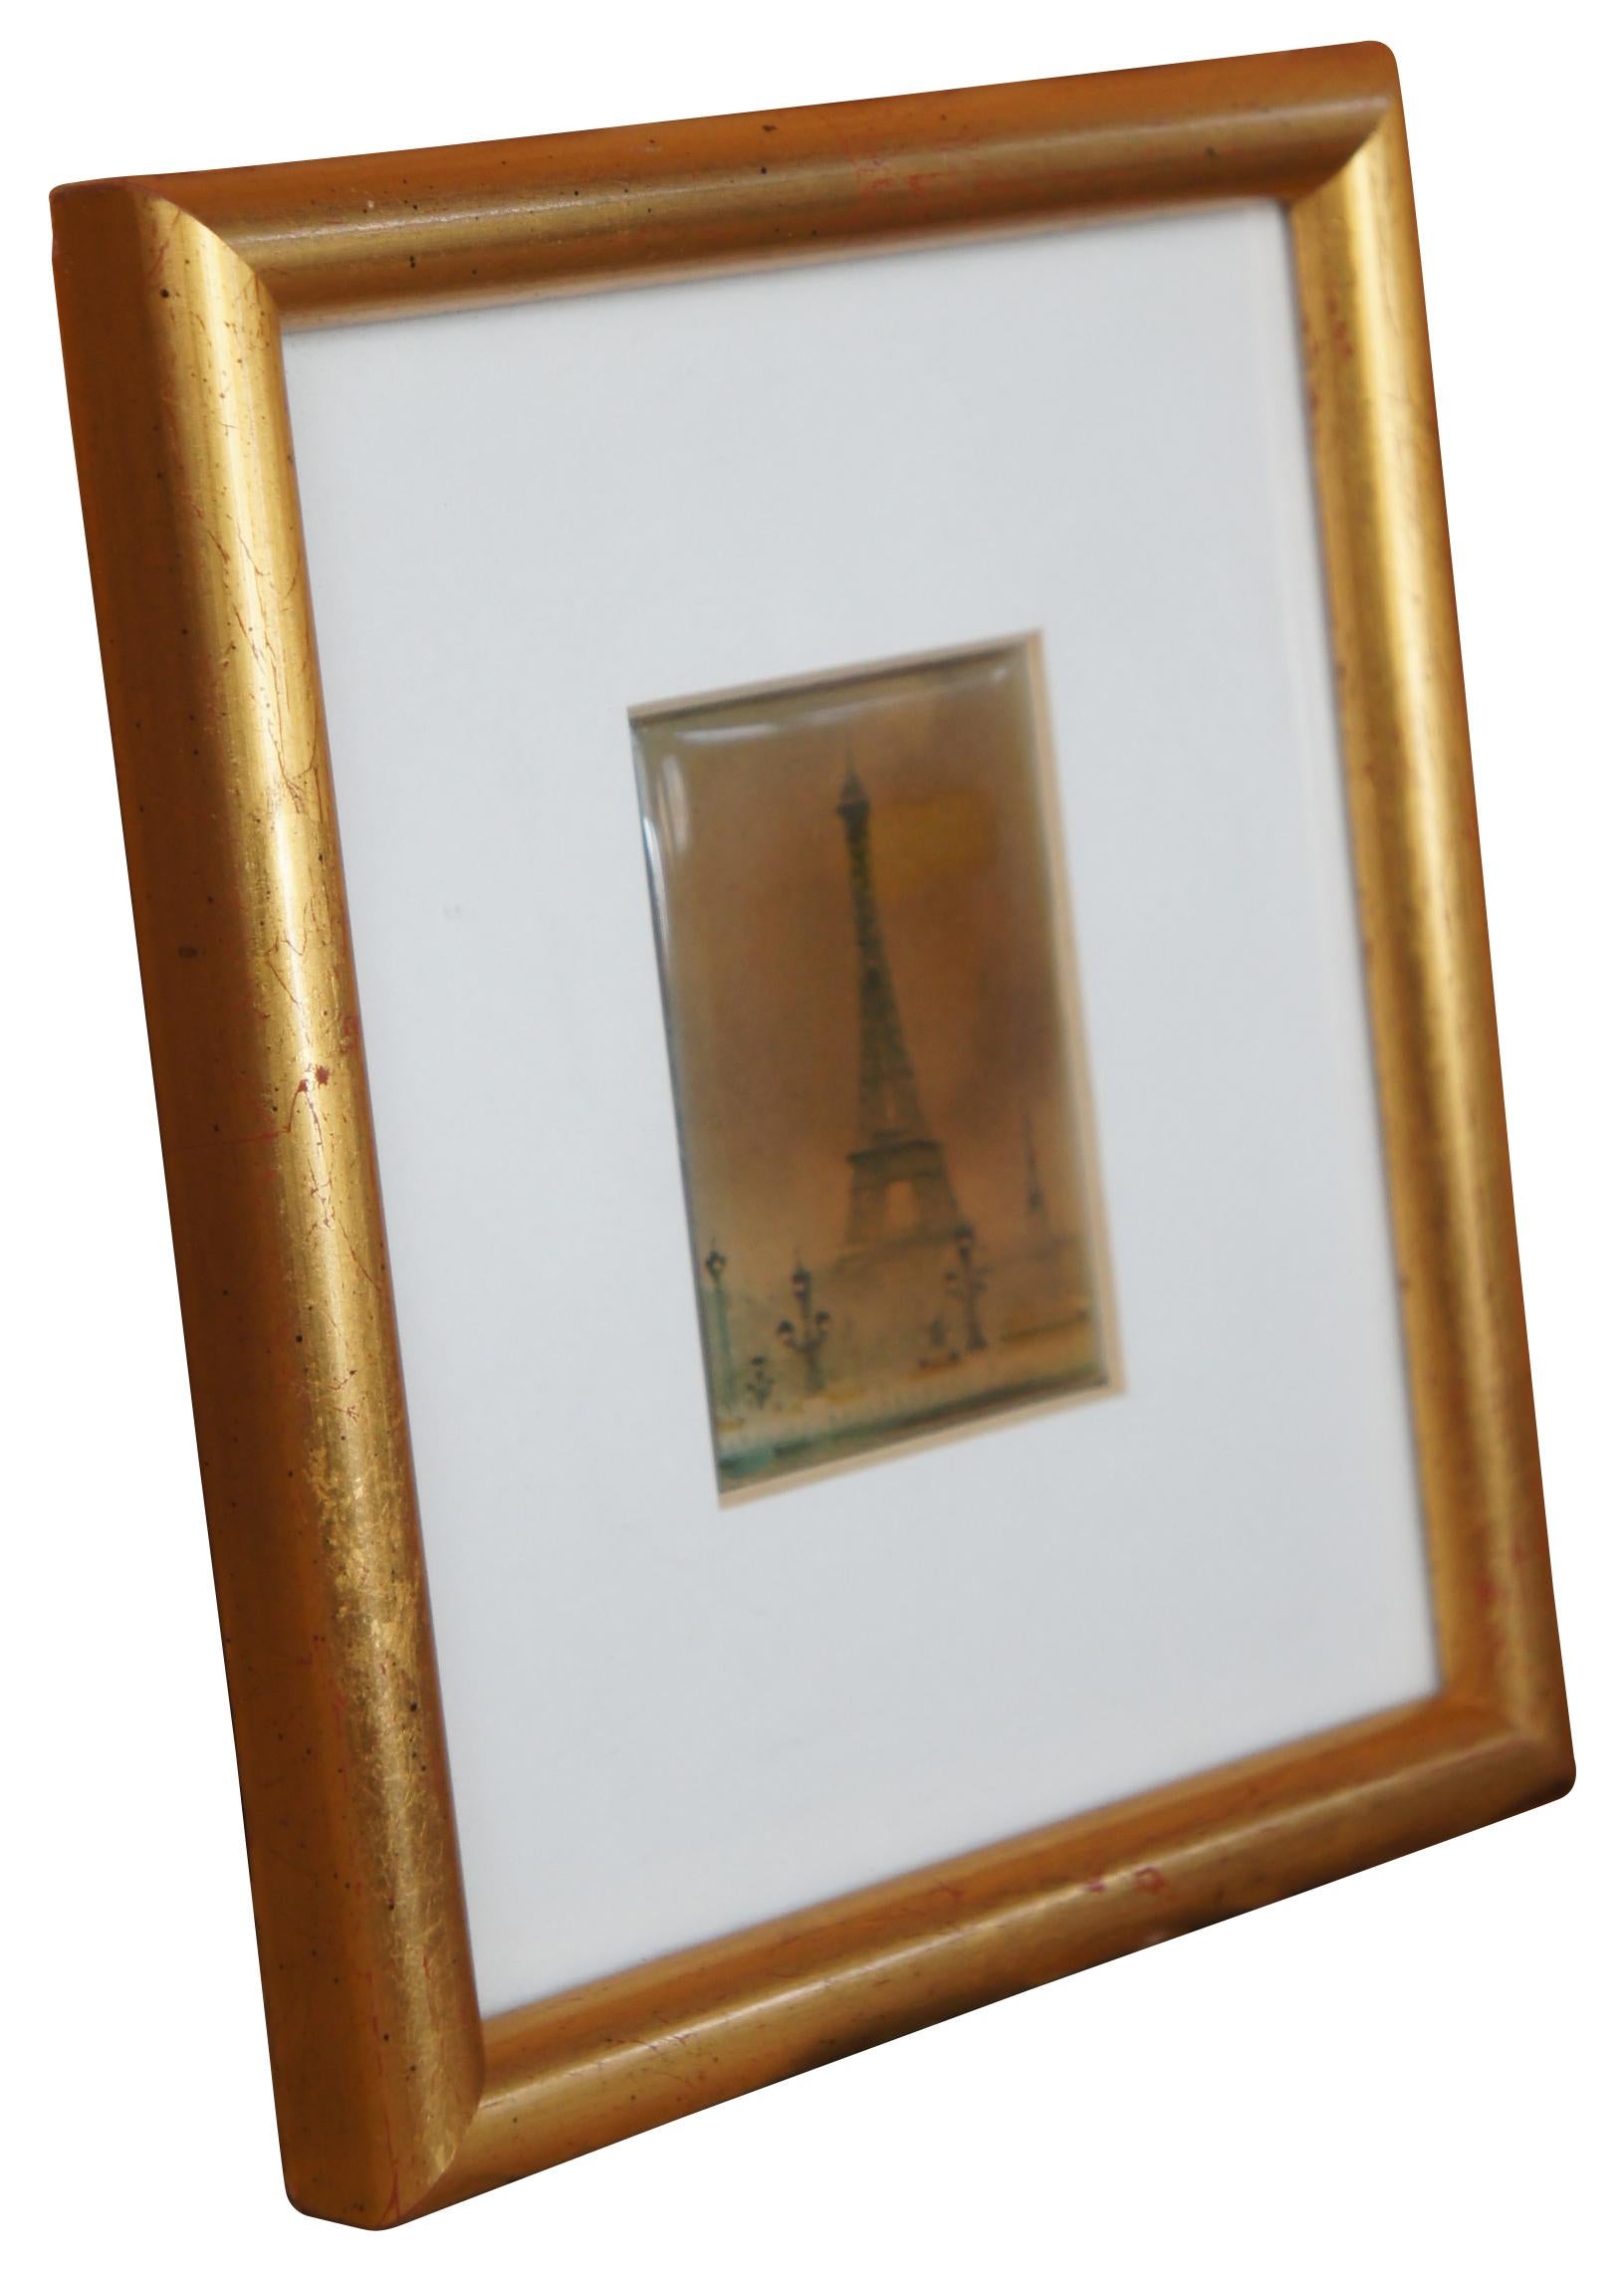 Vintage hand painted ceramic tile in a white matted gold frame. The tile features a scene of the Eiffel Tower viewed from a Paris street.

Measures: 5.5